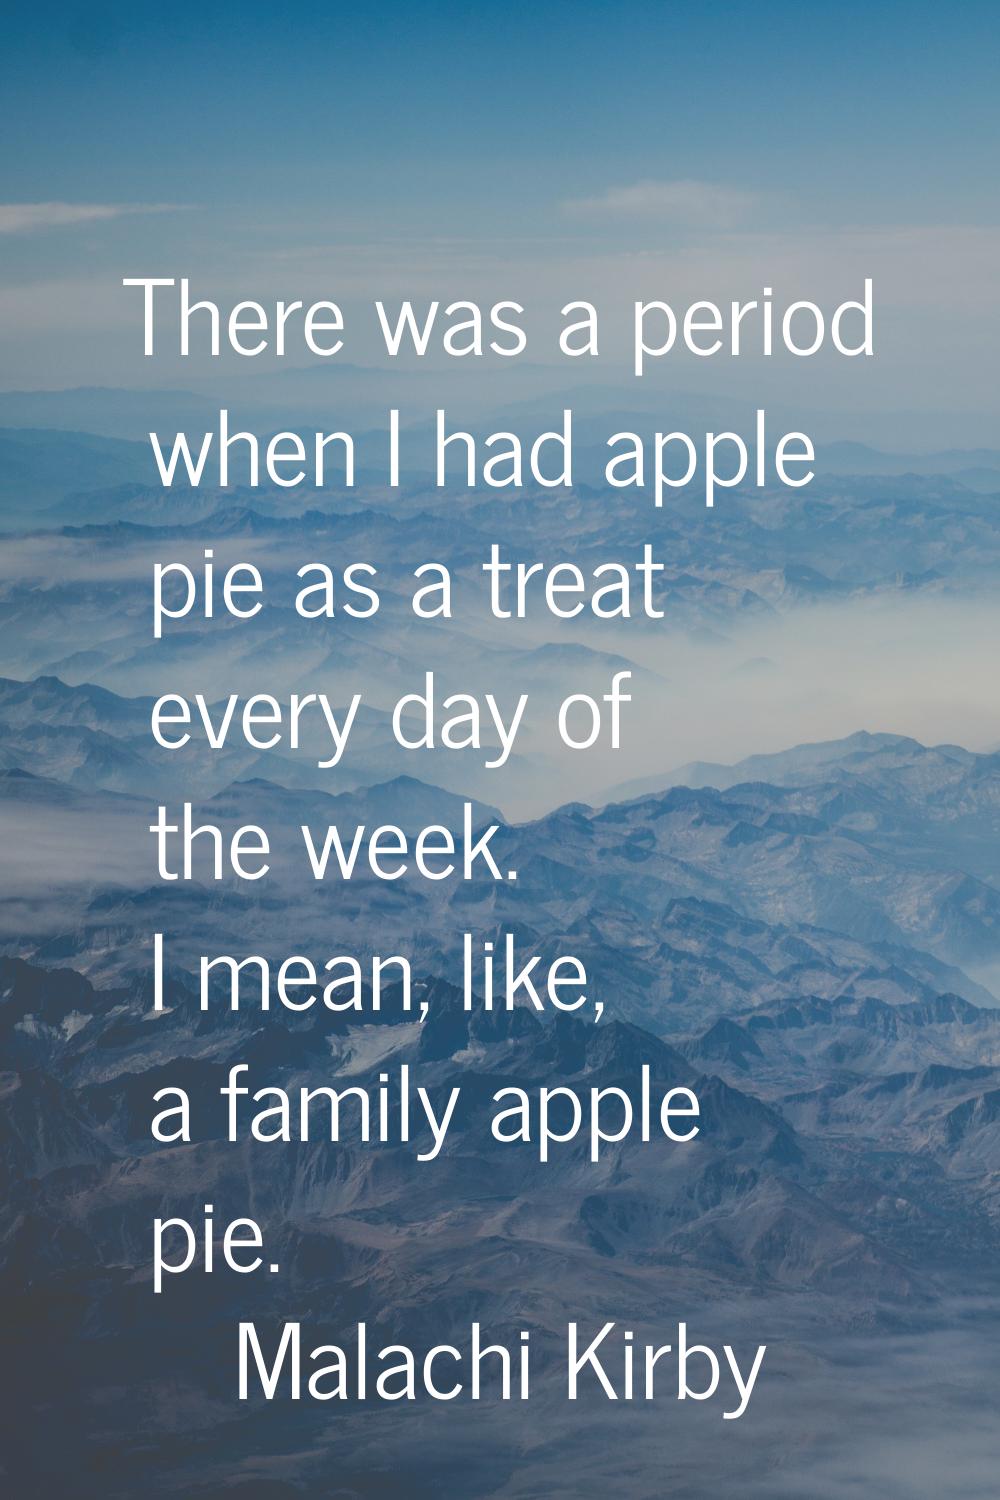 There was a period when I had apple pie as a treat every day of the week. I mean, like, a family ap